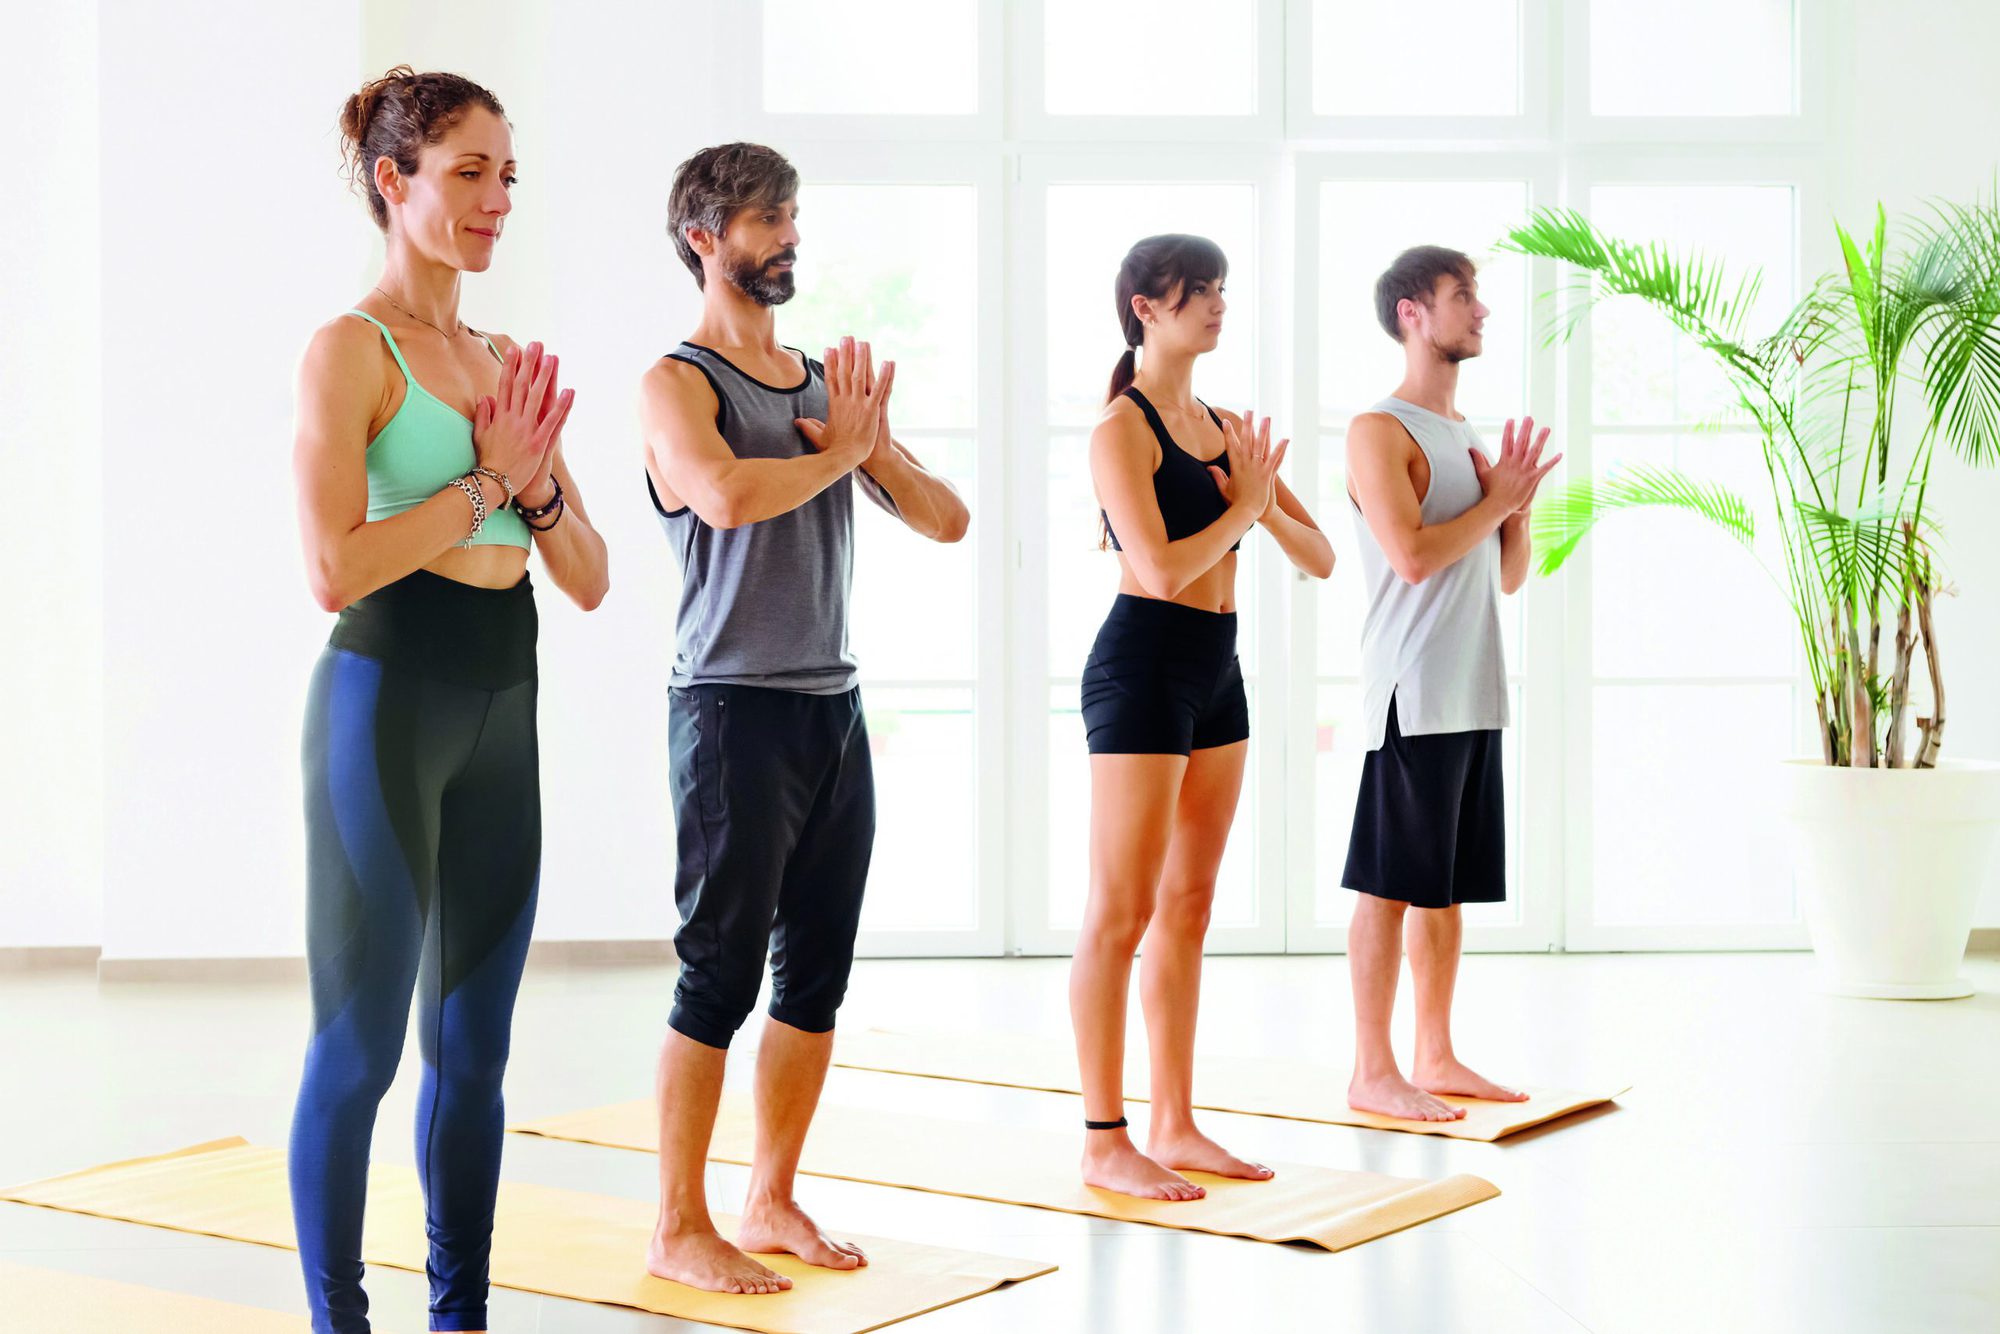 Small group of young sporty people practicing yoga indoors, doing Mountain pose or Tadasana exercise, standing in spacious studio against bright window